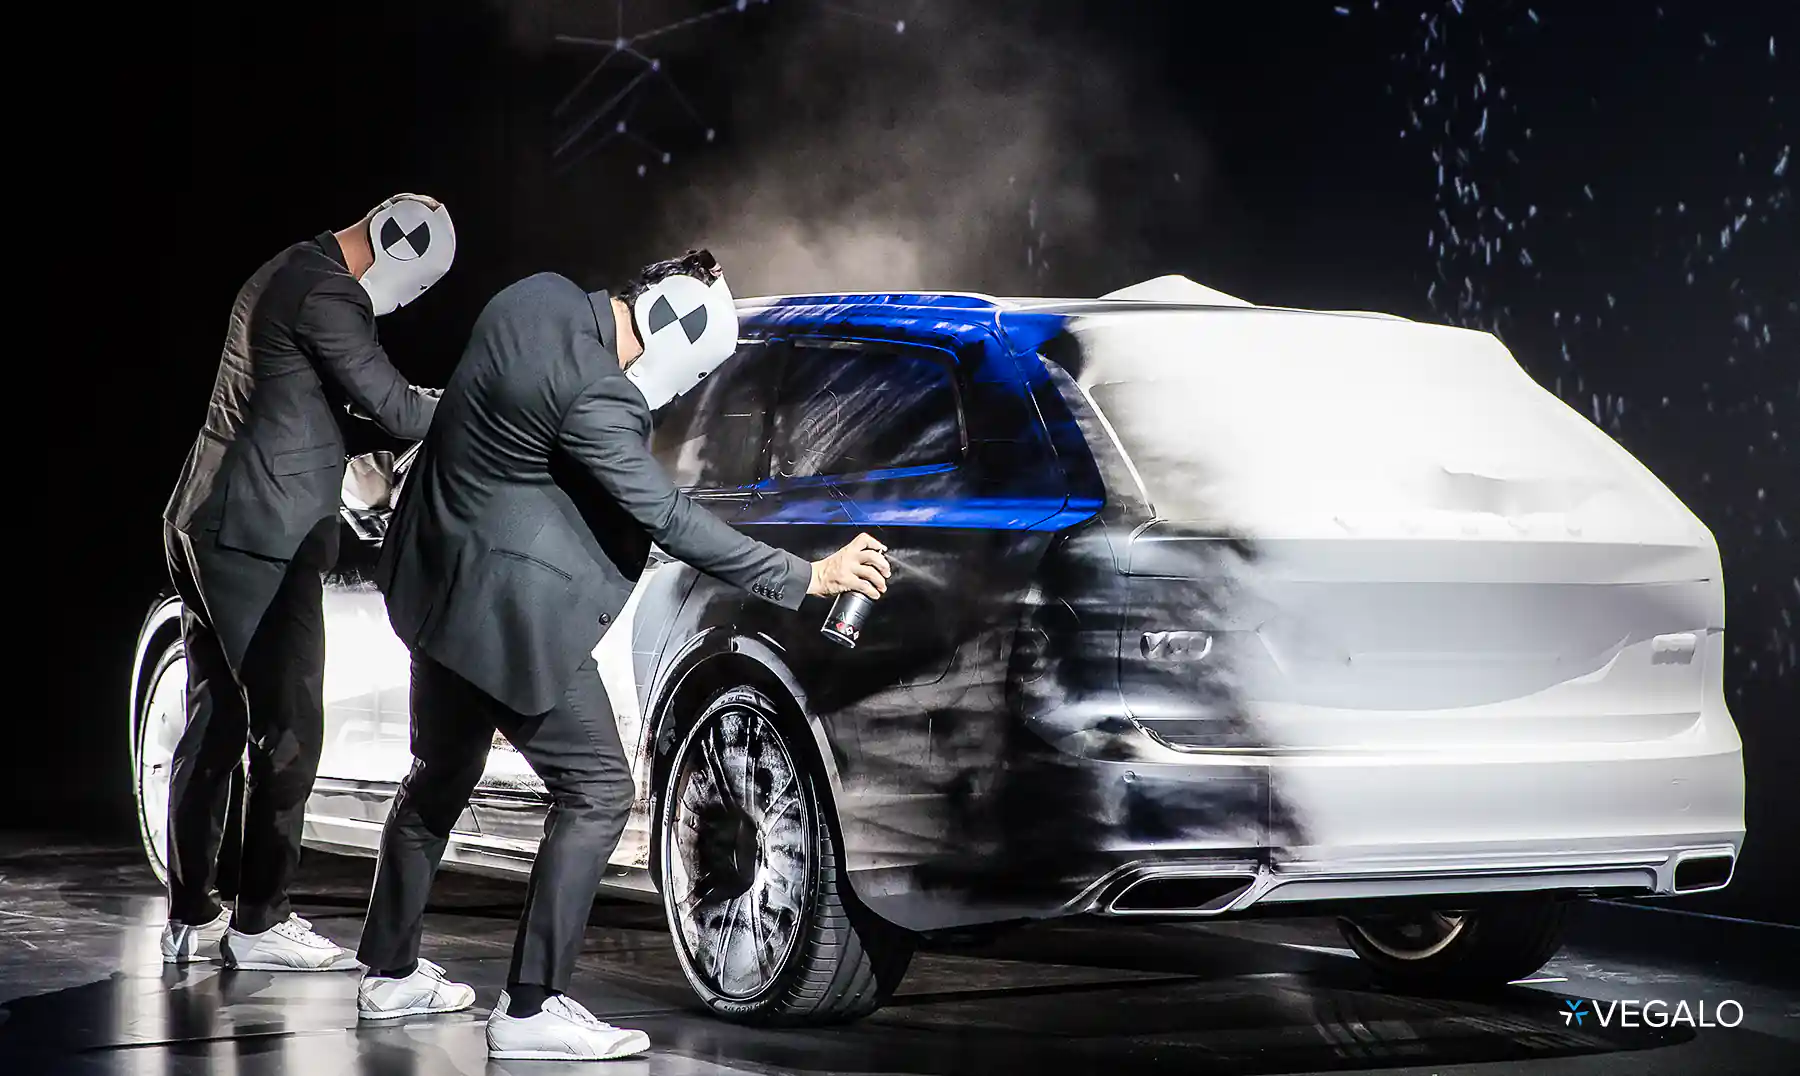 event photo of two men on stage, dressed in costume and spray painting a car